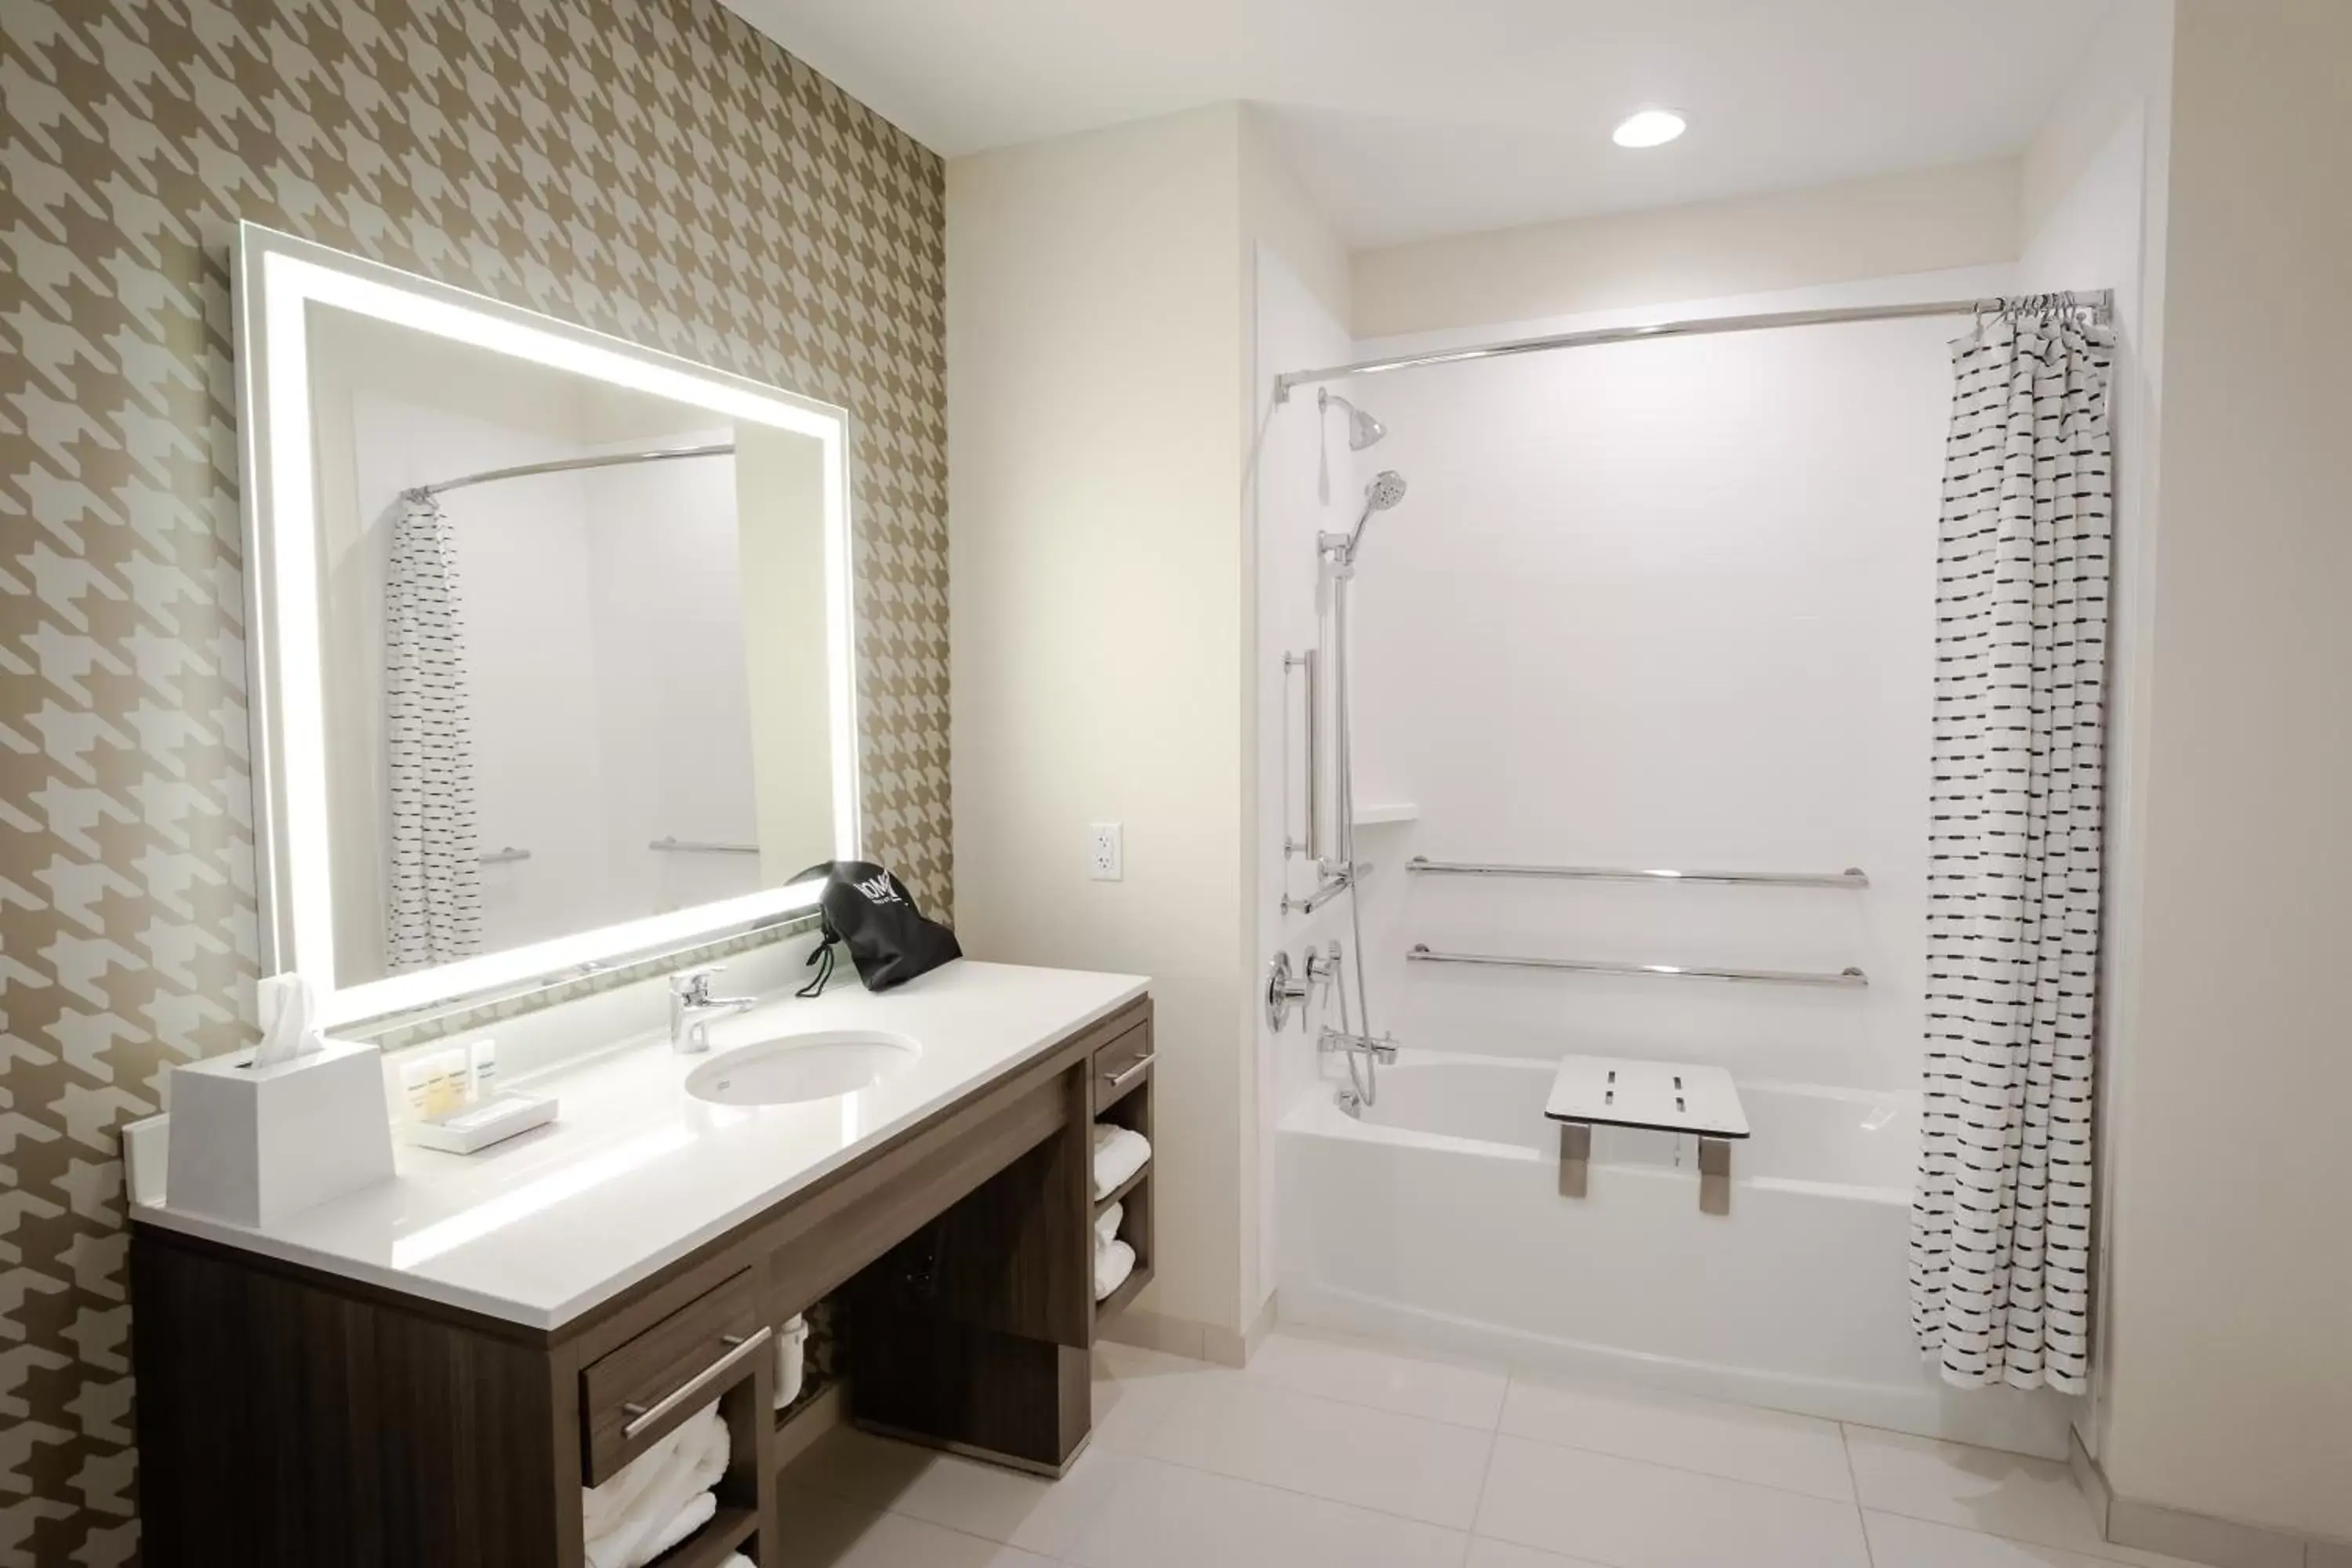 Bathroom in Home2 Suites by Hilton Pflugerville, TX